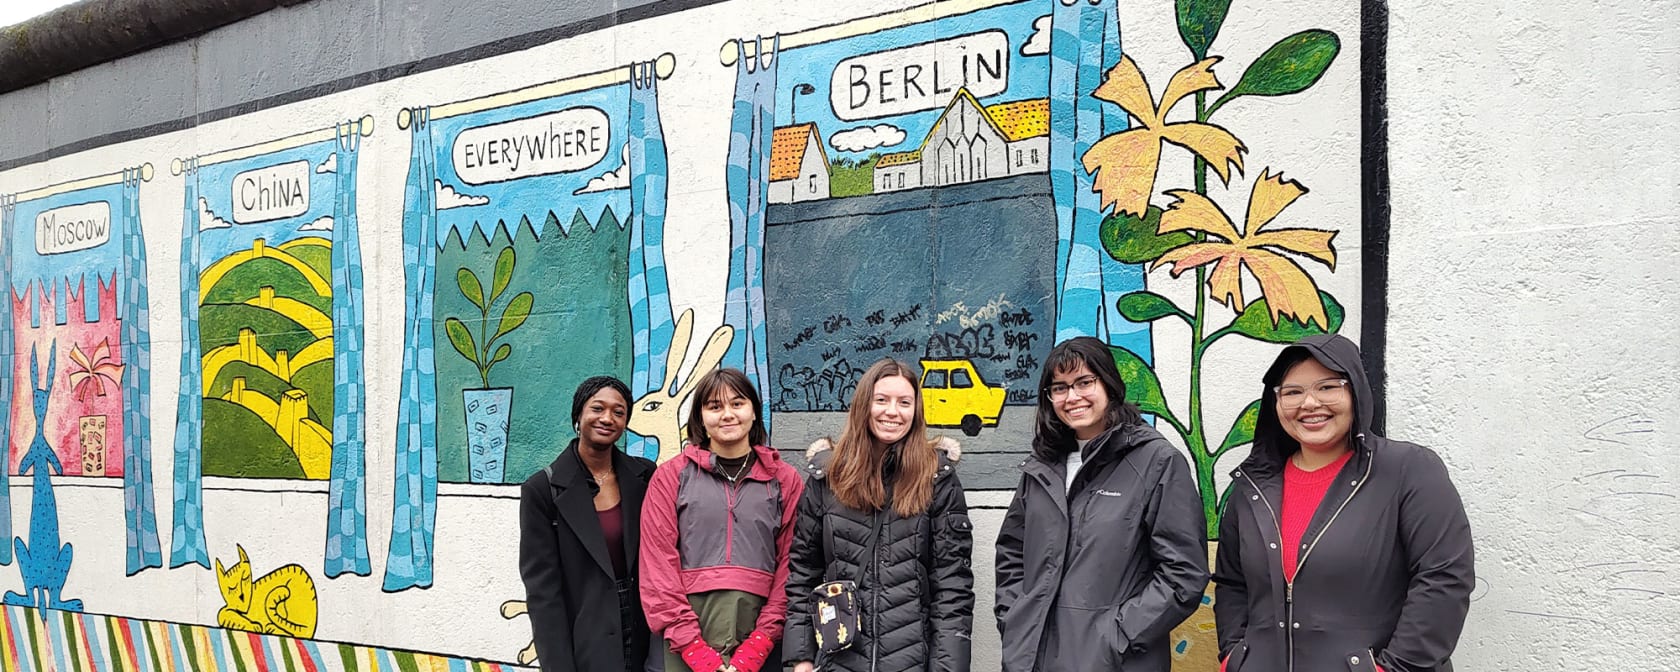 AIFS students in Berlin, Germany, standing next to a mural.